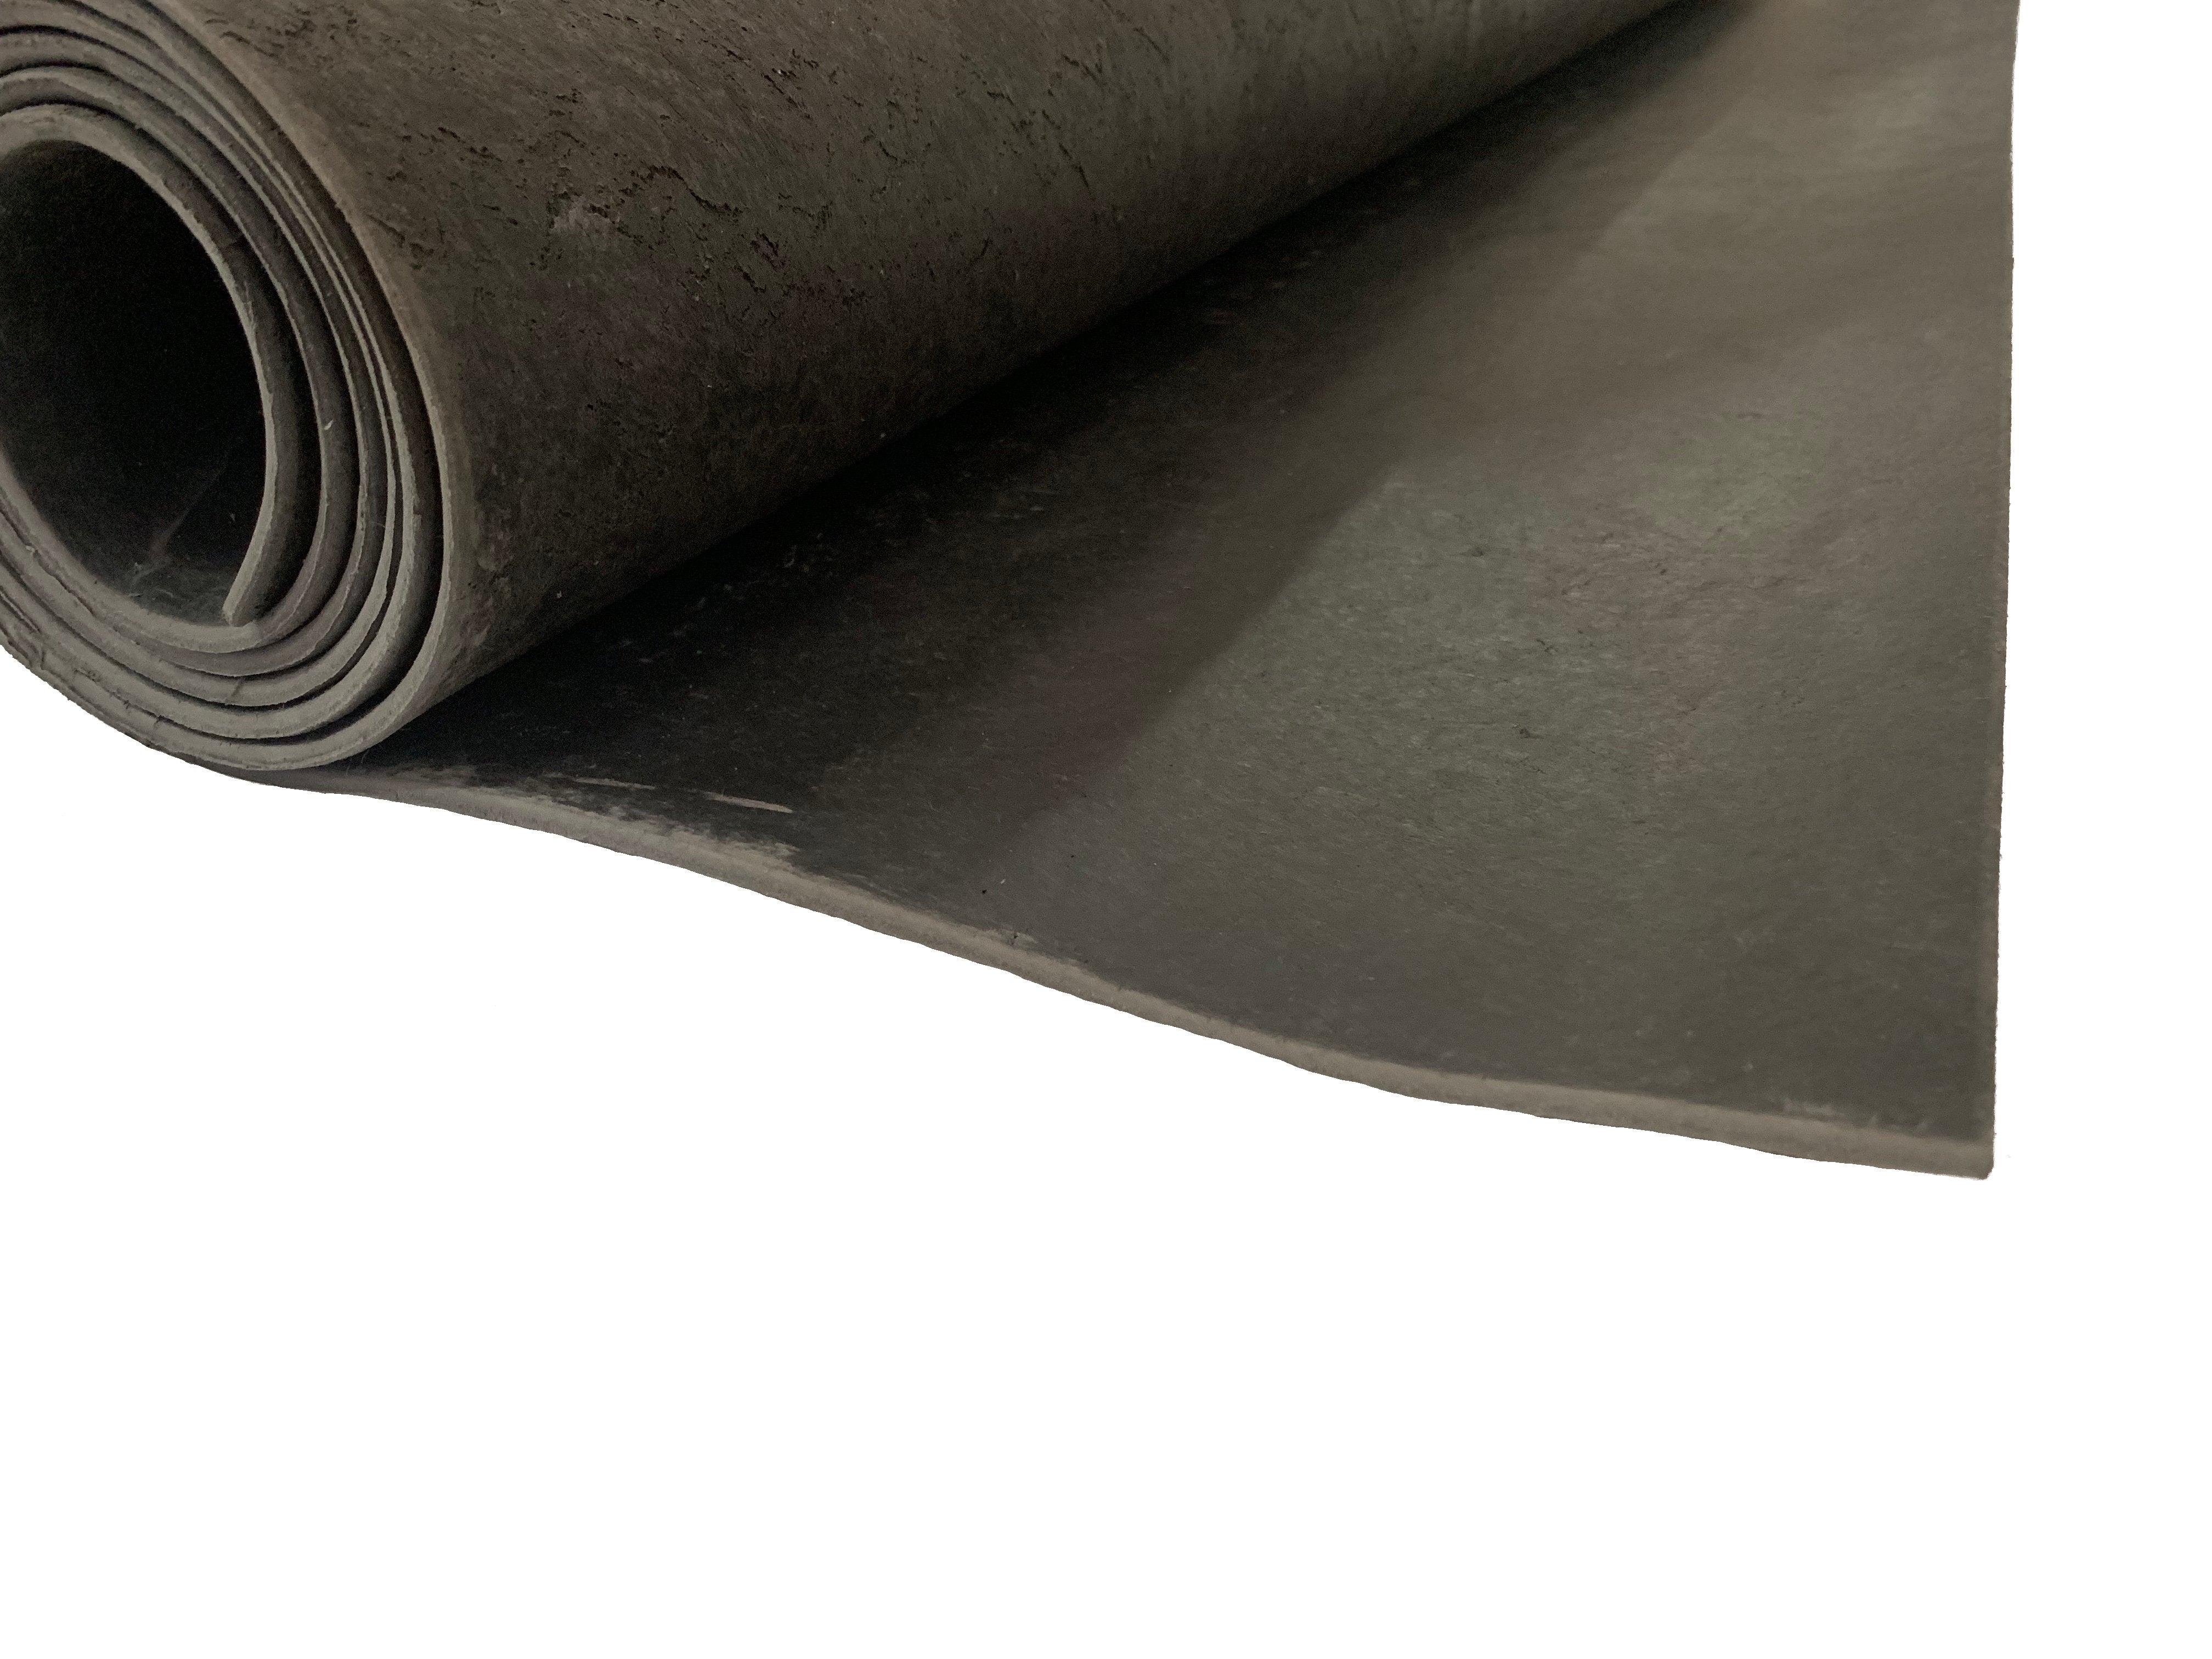 Soundproofing Mat - 1.2m by 2m by 5mm thick - 10kg Membrane - Advanced Acoustics